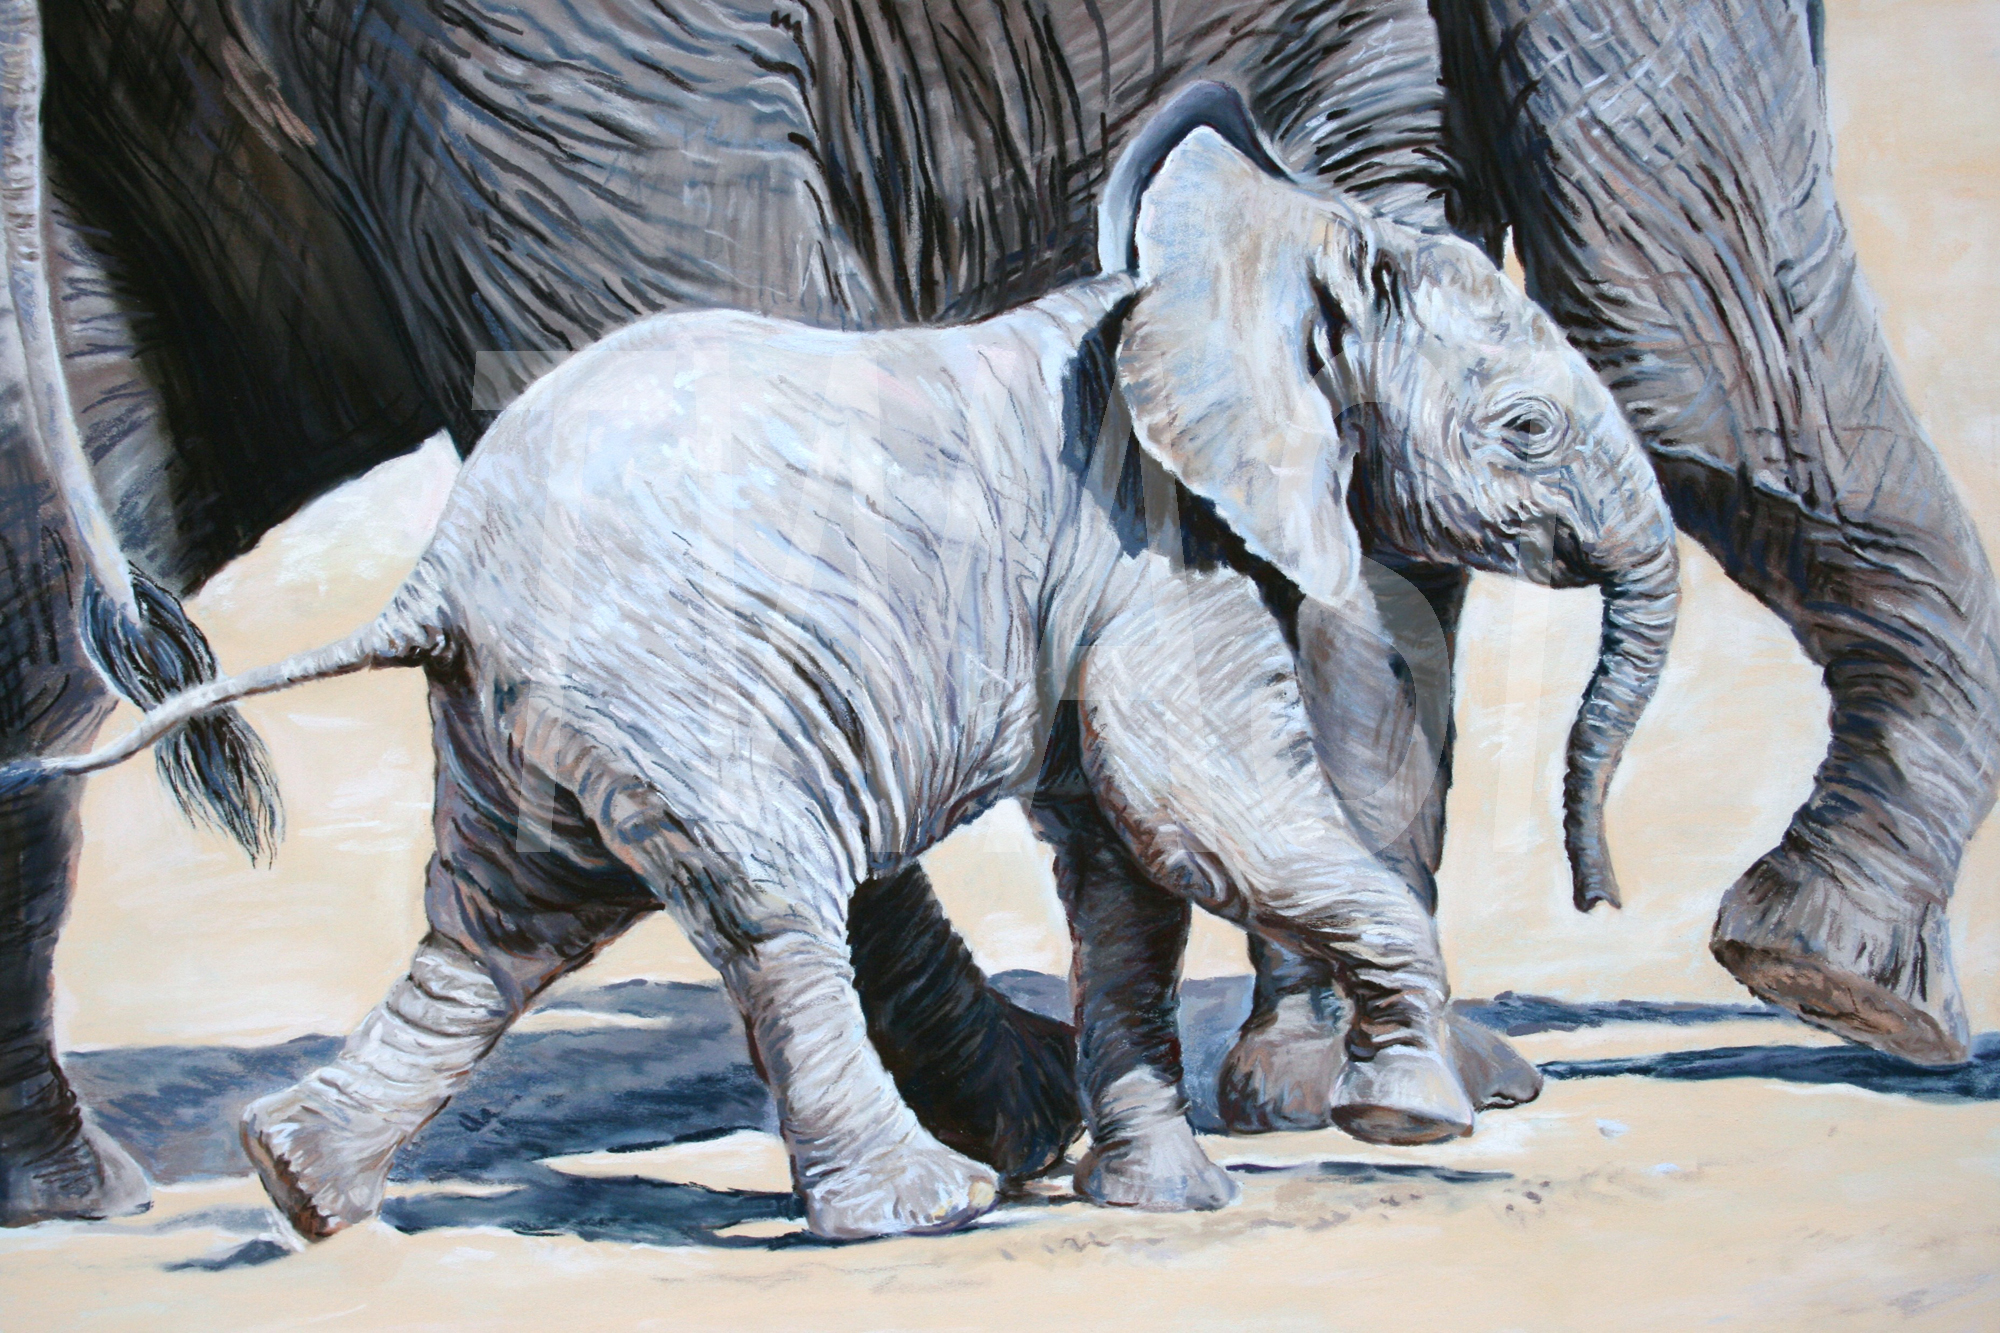 Baby Steps by Carol Barrett For my early years I lived on a Border farm where my two great passions developed ~ a fascination for animals and drawing. After graduating from Edinburgh Art College, I continued to specialize in animal art, which later led me to visit Africa. I was enthralled by its wildlife and knew my fate was sealed, nearly 40 years ago, to be a wildlife artist. I have been extremely fortunate to have spent a fair bit of time out in the bush sketching elephant in Chobe NP, lion in the Selous Game Reserve, & cheetah in Namibia and other fascinating wildlife in other parts of Africa and these privileged encounters have fuelled a deep desire to help preserve them. Conservation is a key motivator and why I do my best to donate all my artwork to support this kind of work wherever possible. Artist’s statement: ‘As a wildlife artist, I aim to capture my subjects’ beauty, majesty, grace and dignity to pay homage to these incredible animals. I want to evoke empathy, compassion and wonder. My mission is to inspire others to care and cherish the creatures we share our planet with and raise awareness and vital funds for conservation. I believe mankind will be diminished if they are lost.’ carolbarrett@btconnect.com https://www.carolbarrett.co.uk